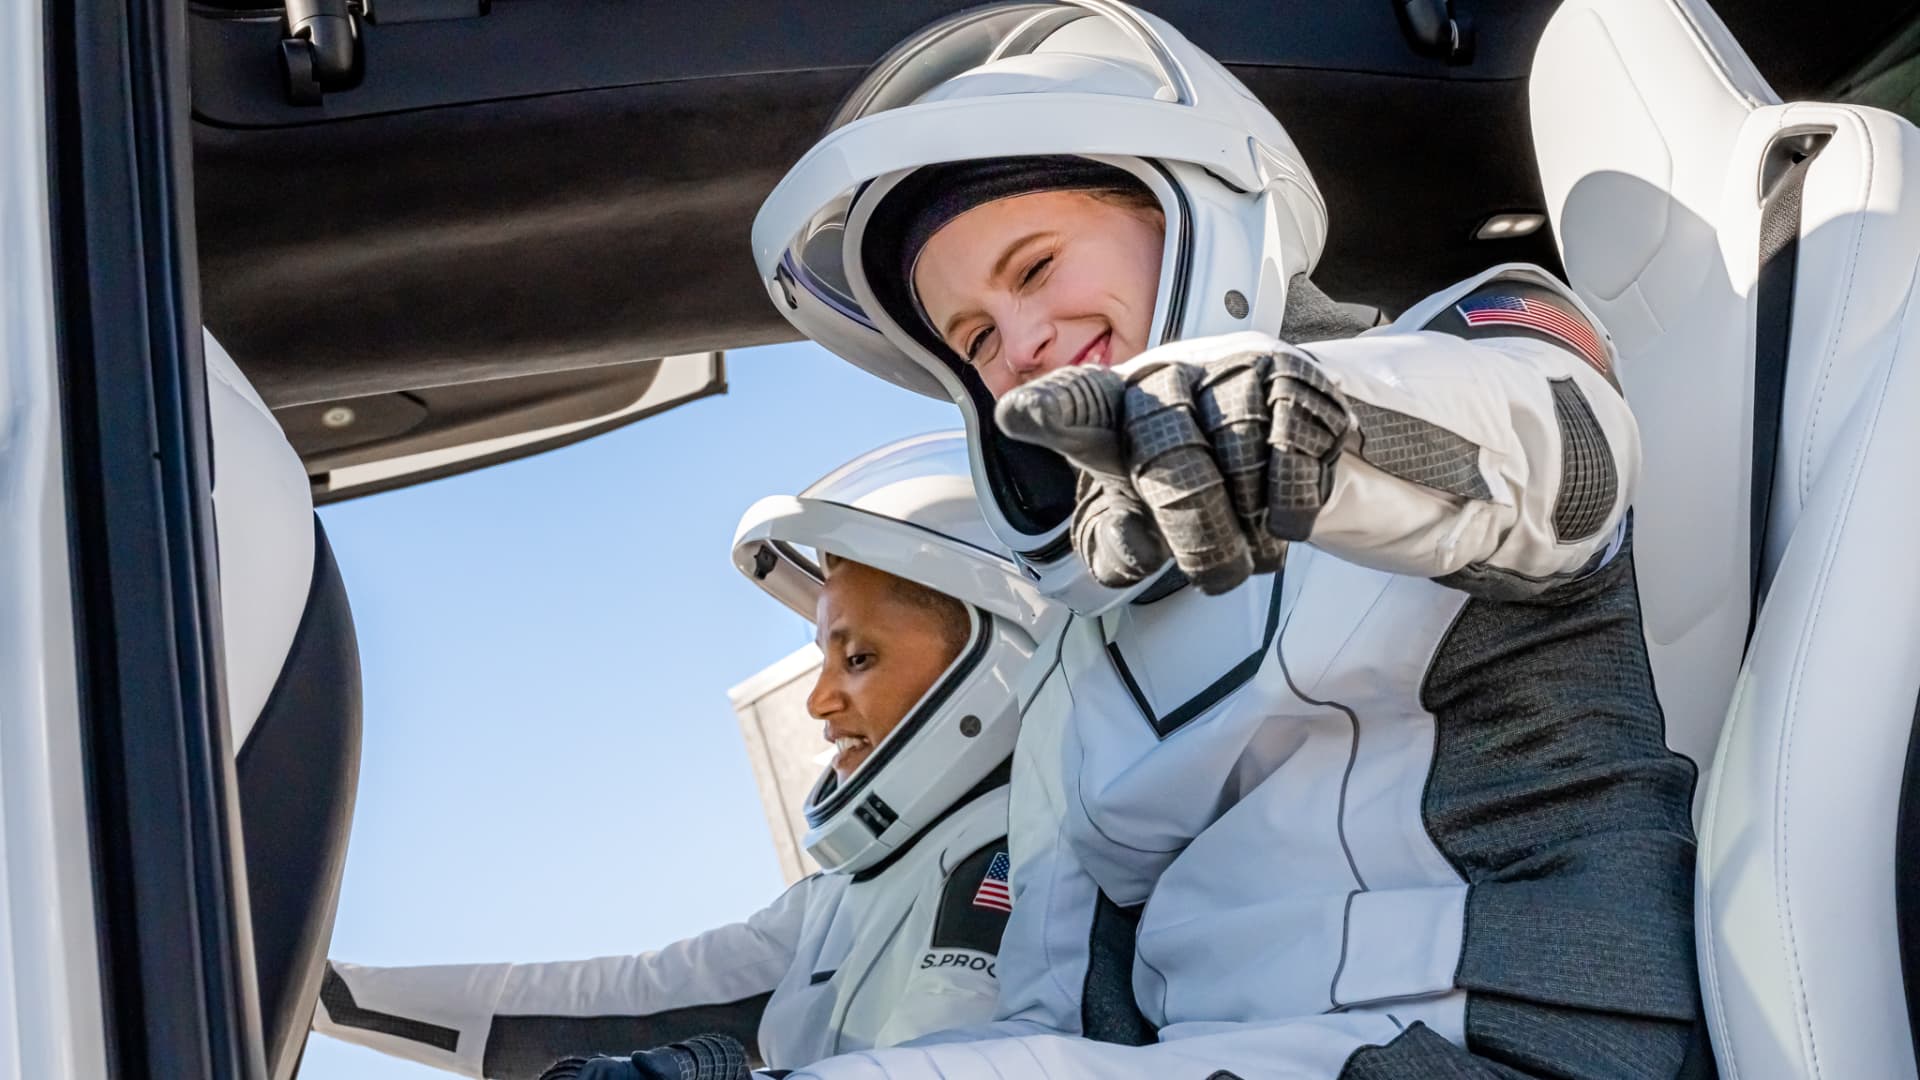 Medical officer Hayley Arceneaux points to the camera as she and pilot Sian Proctor board the Tesla Model X after suiting up before the launch on September 15, 2021.